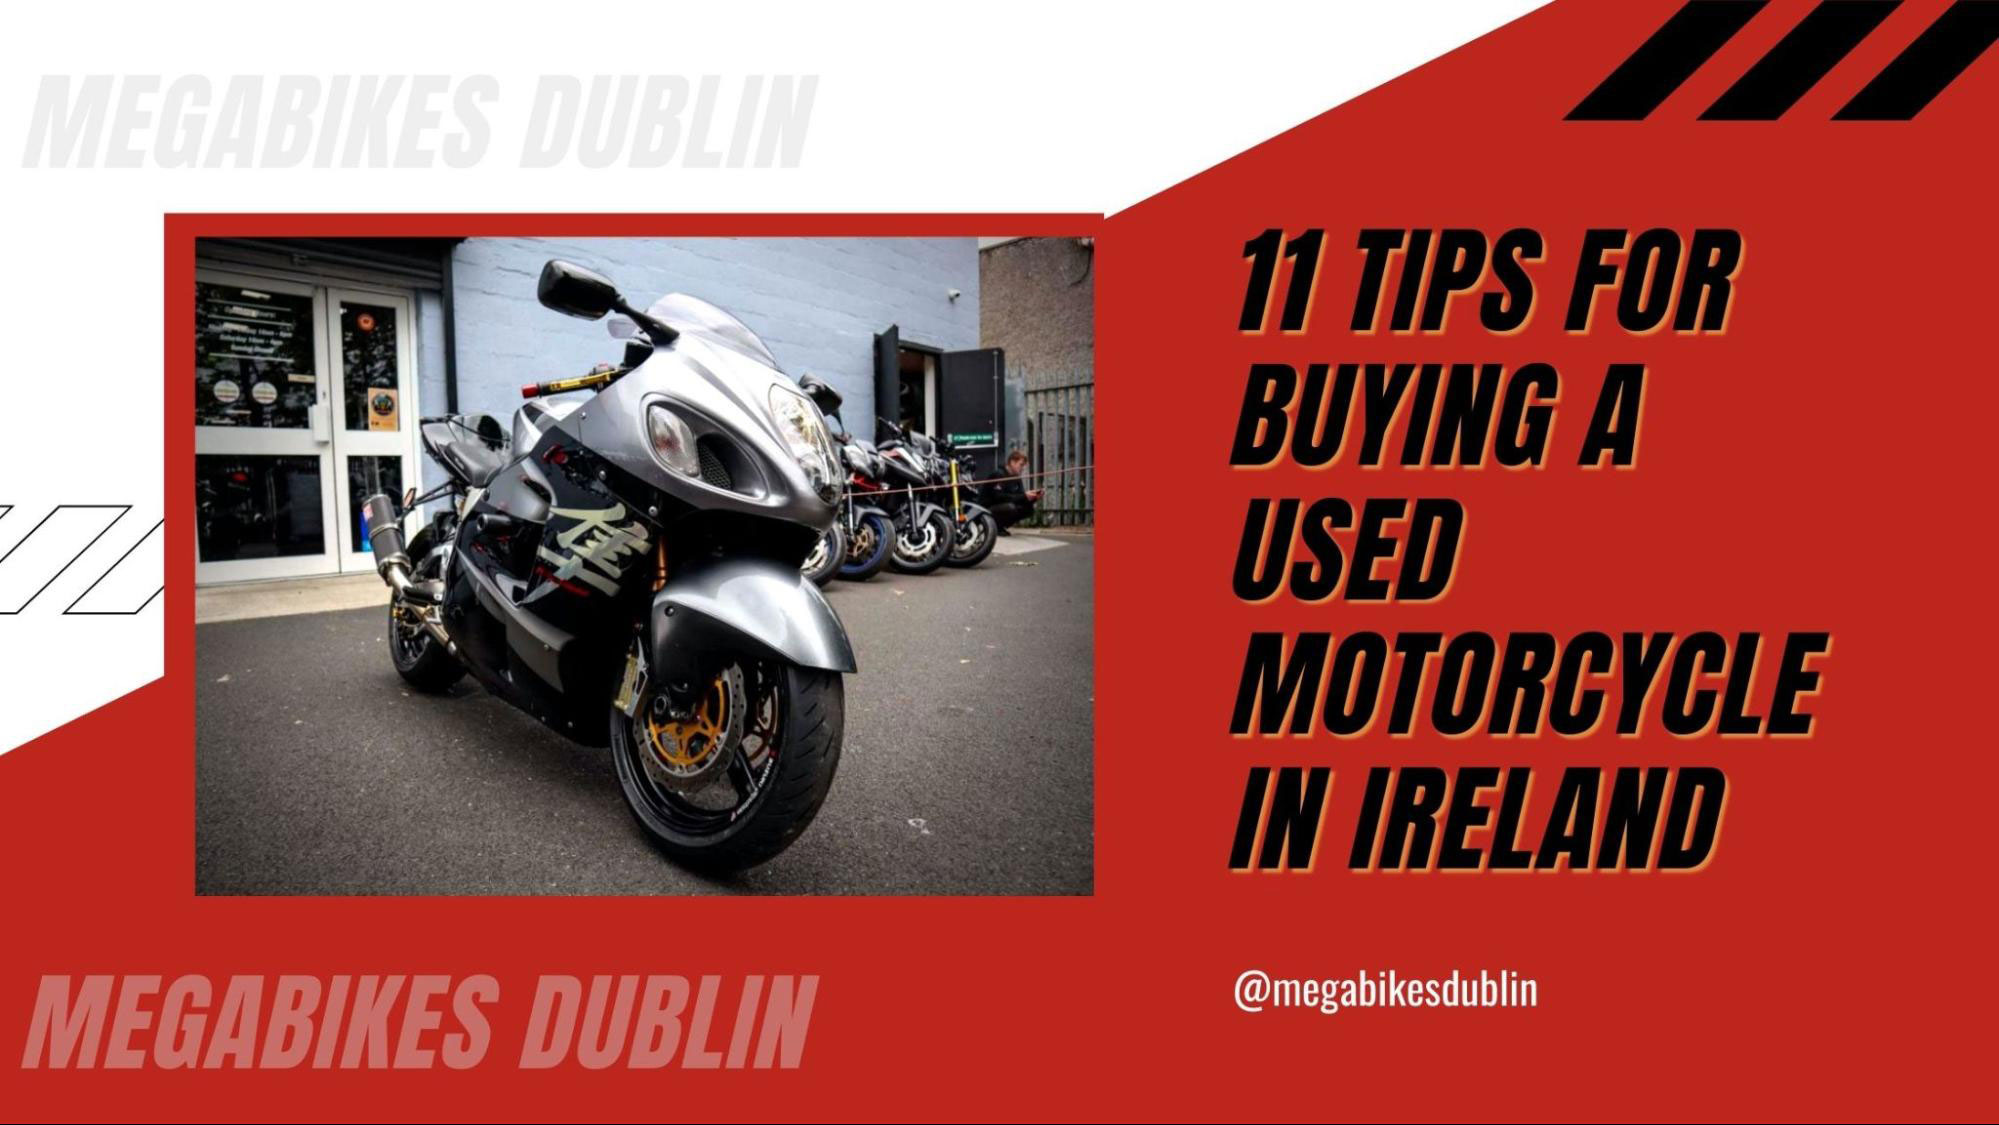 Tips for buying a used motorcycle in Ireland